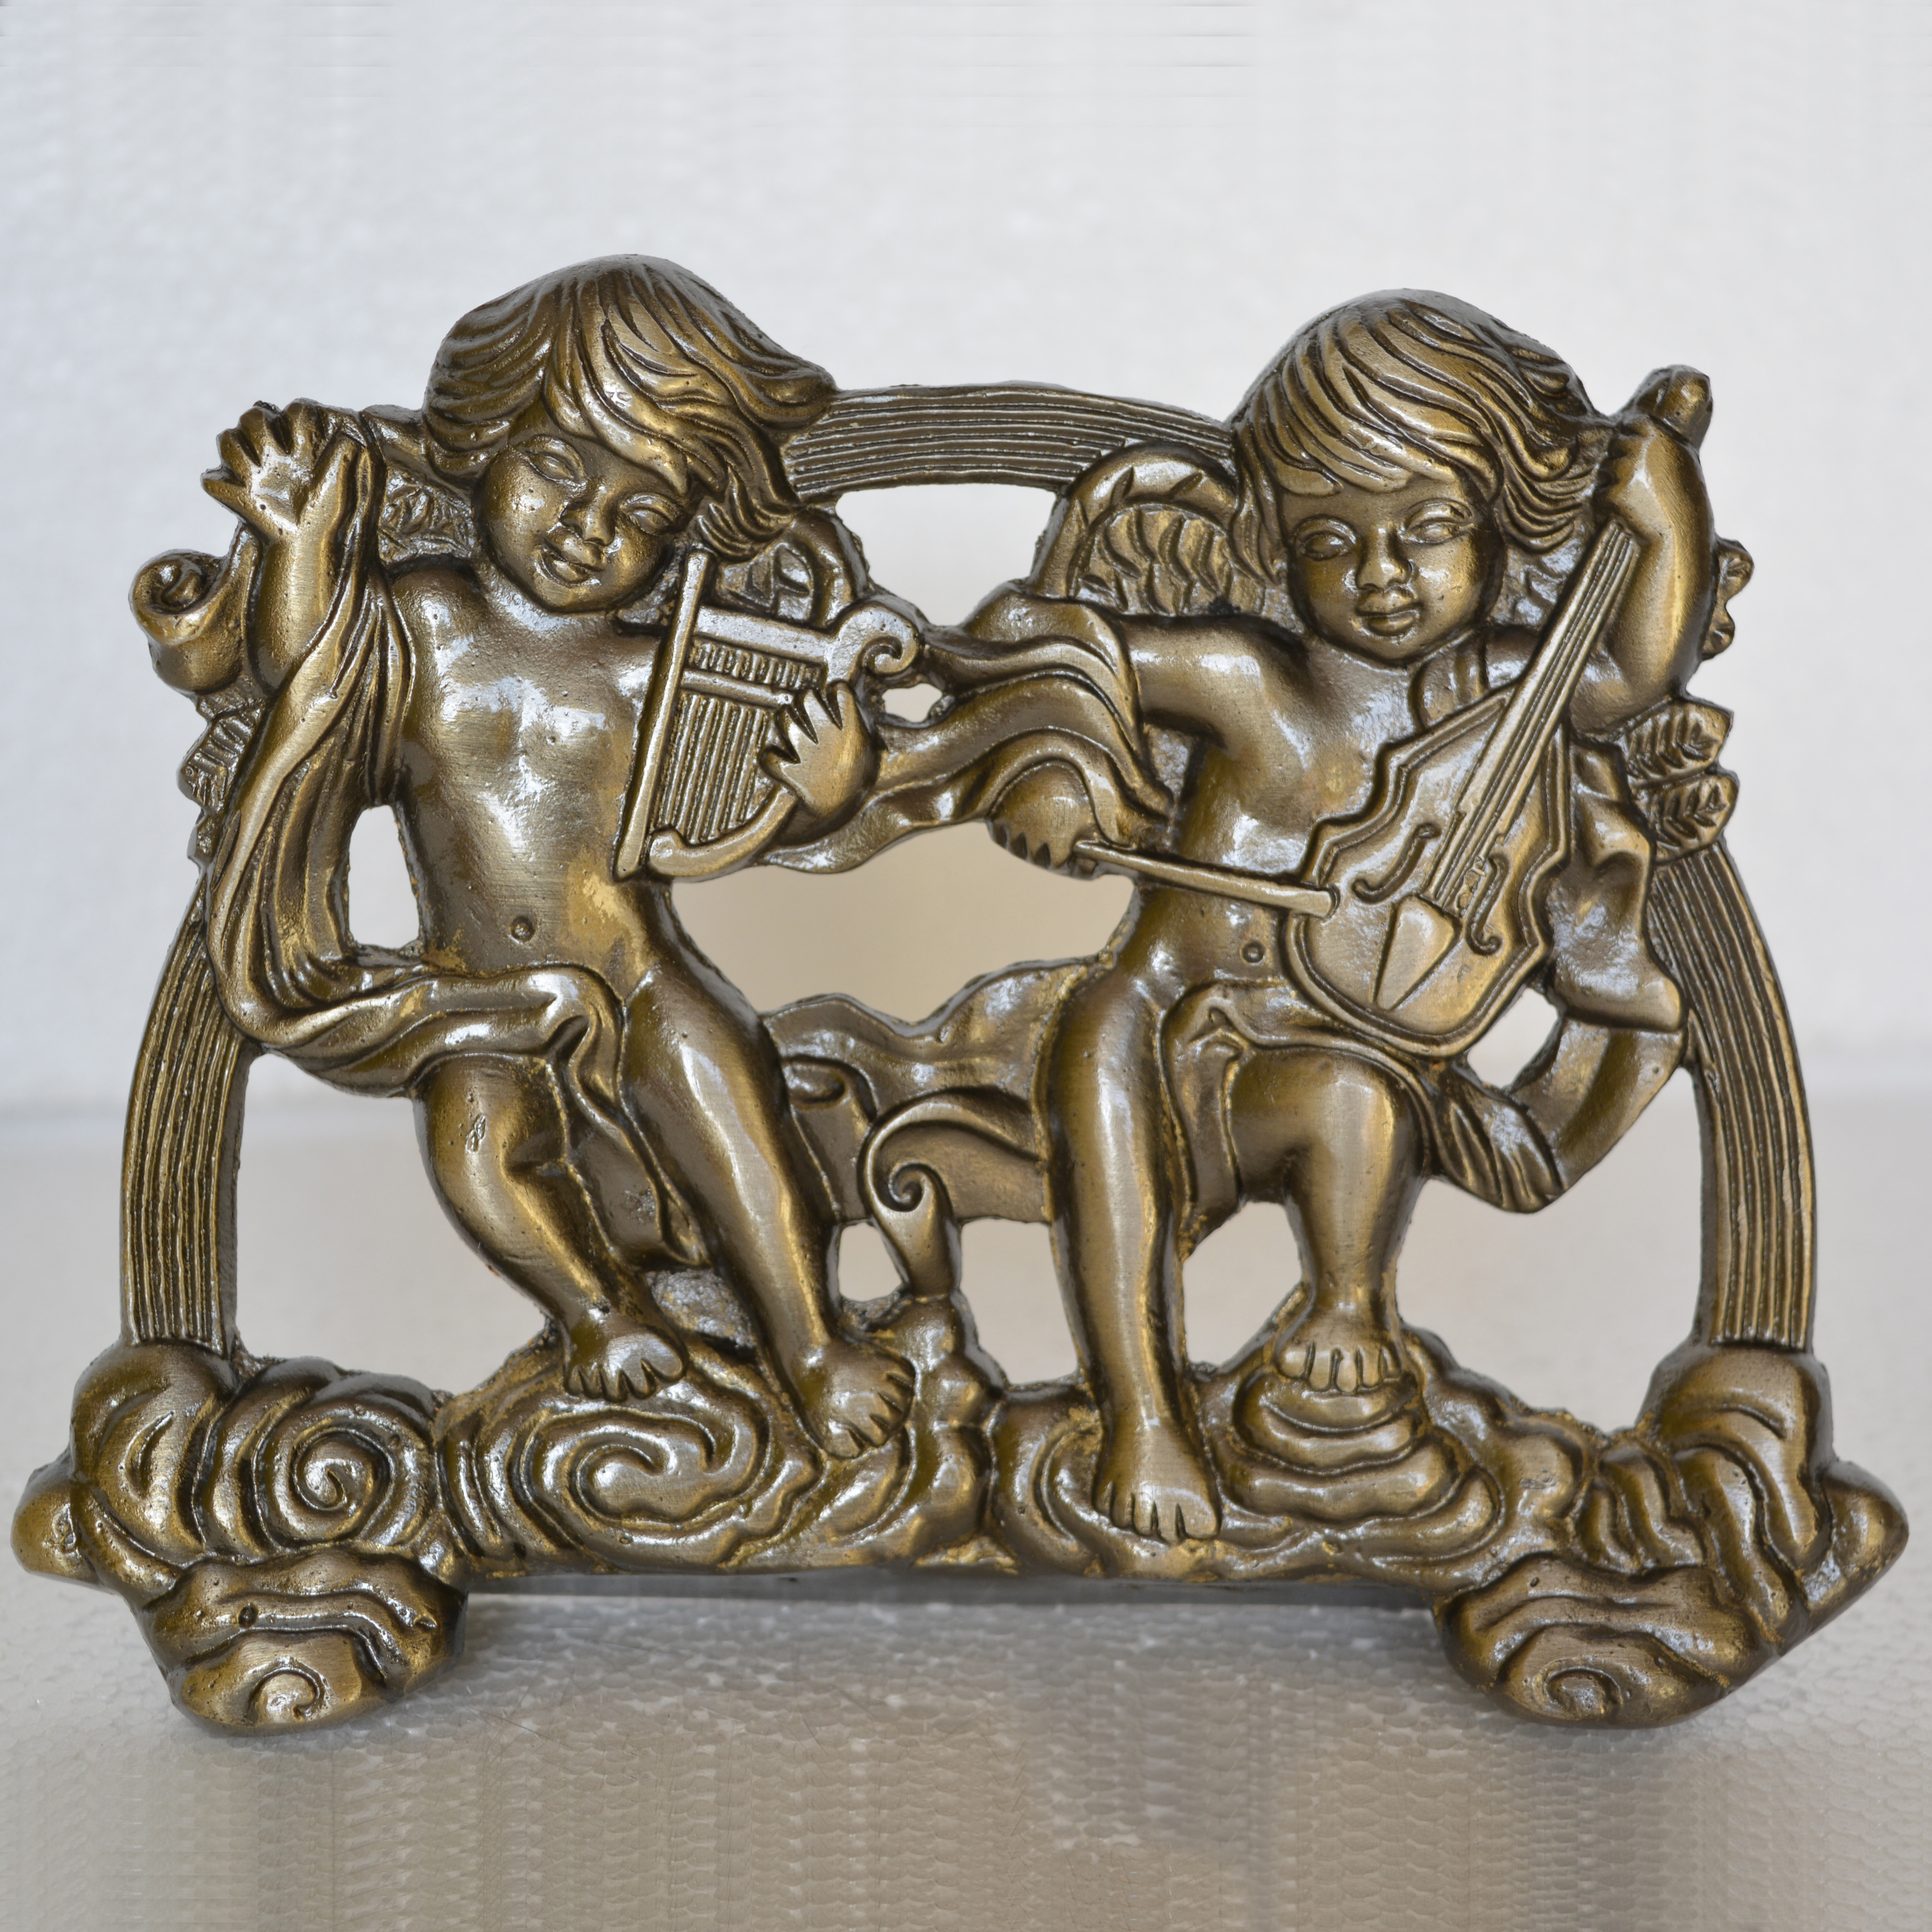 Cute Cupids Metal Wall Plate With Antique Finish for Wall Decor Sculpture Art